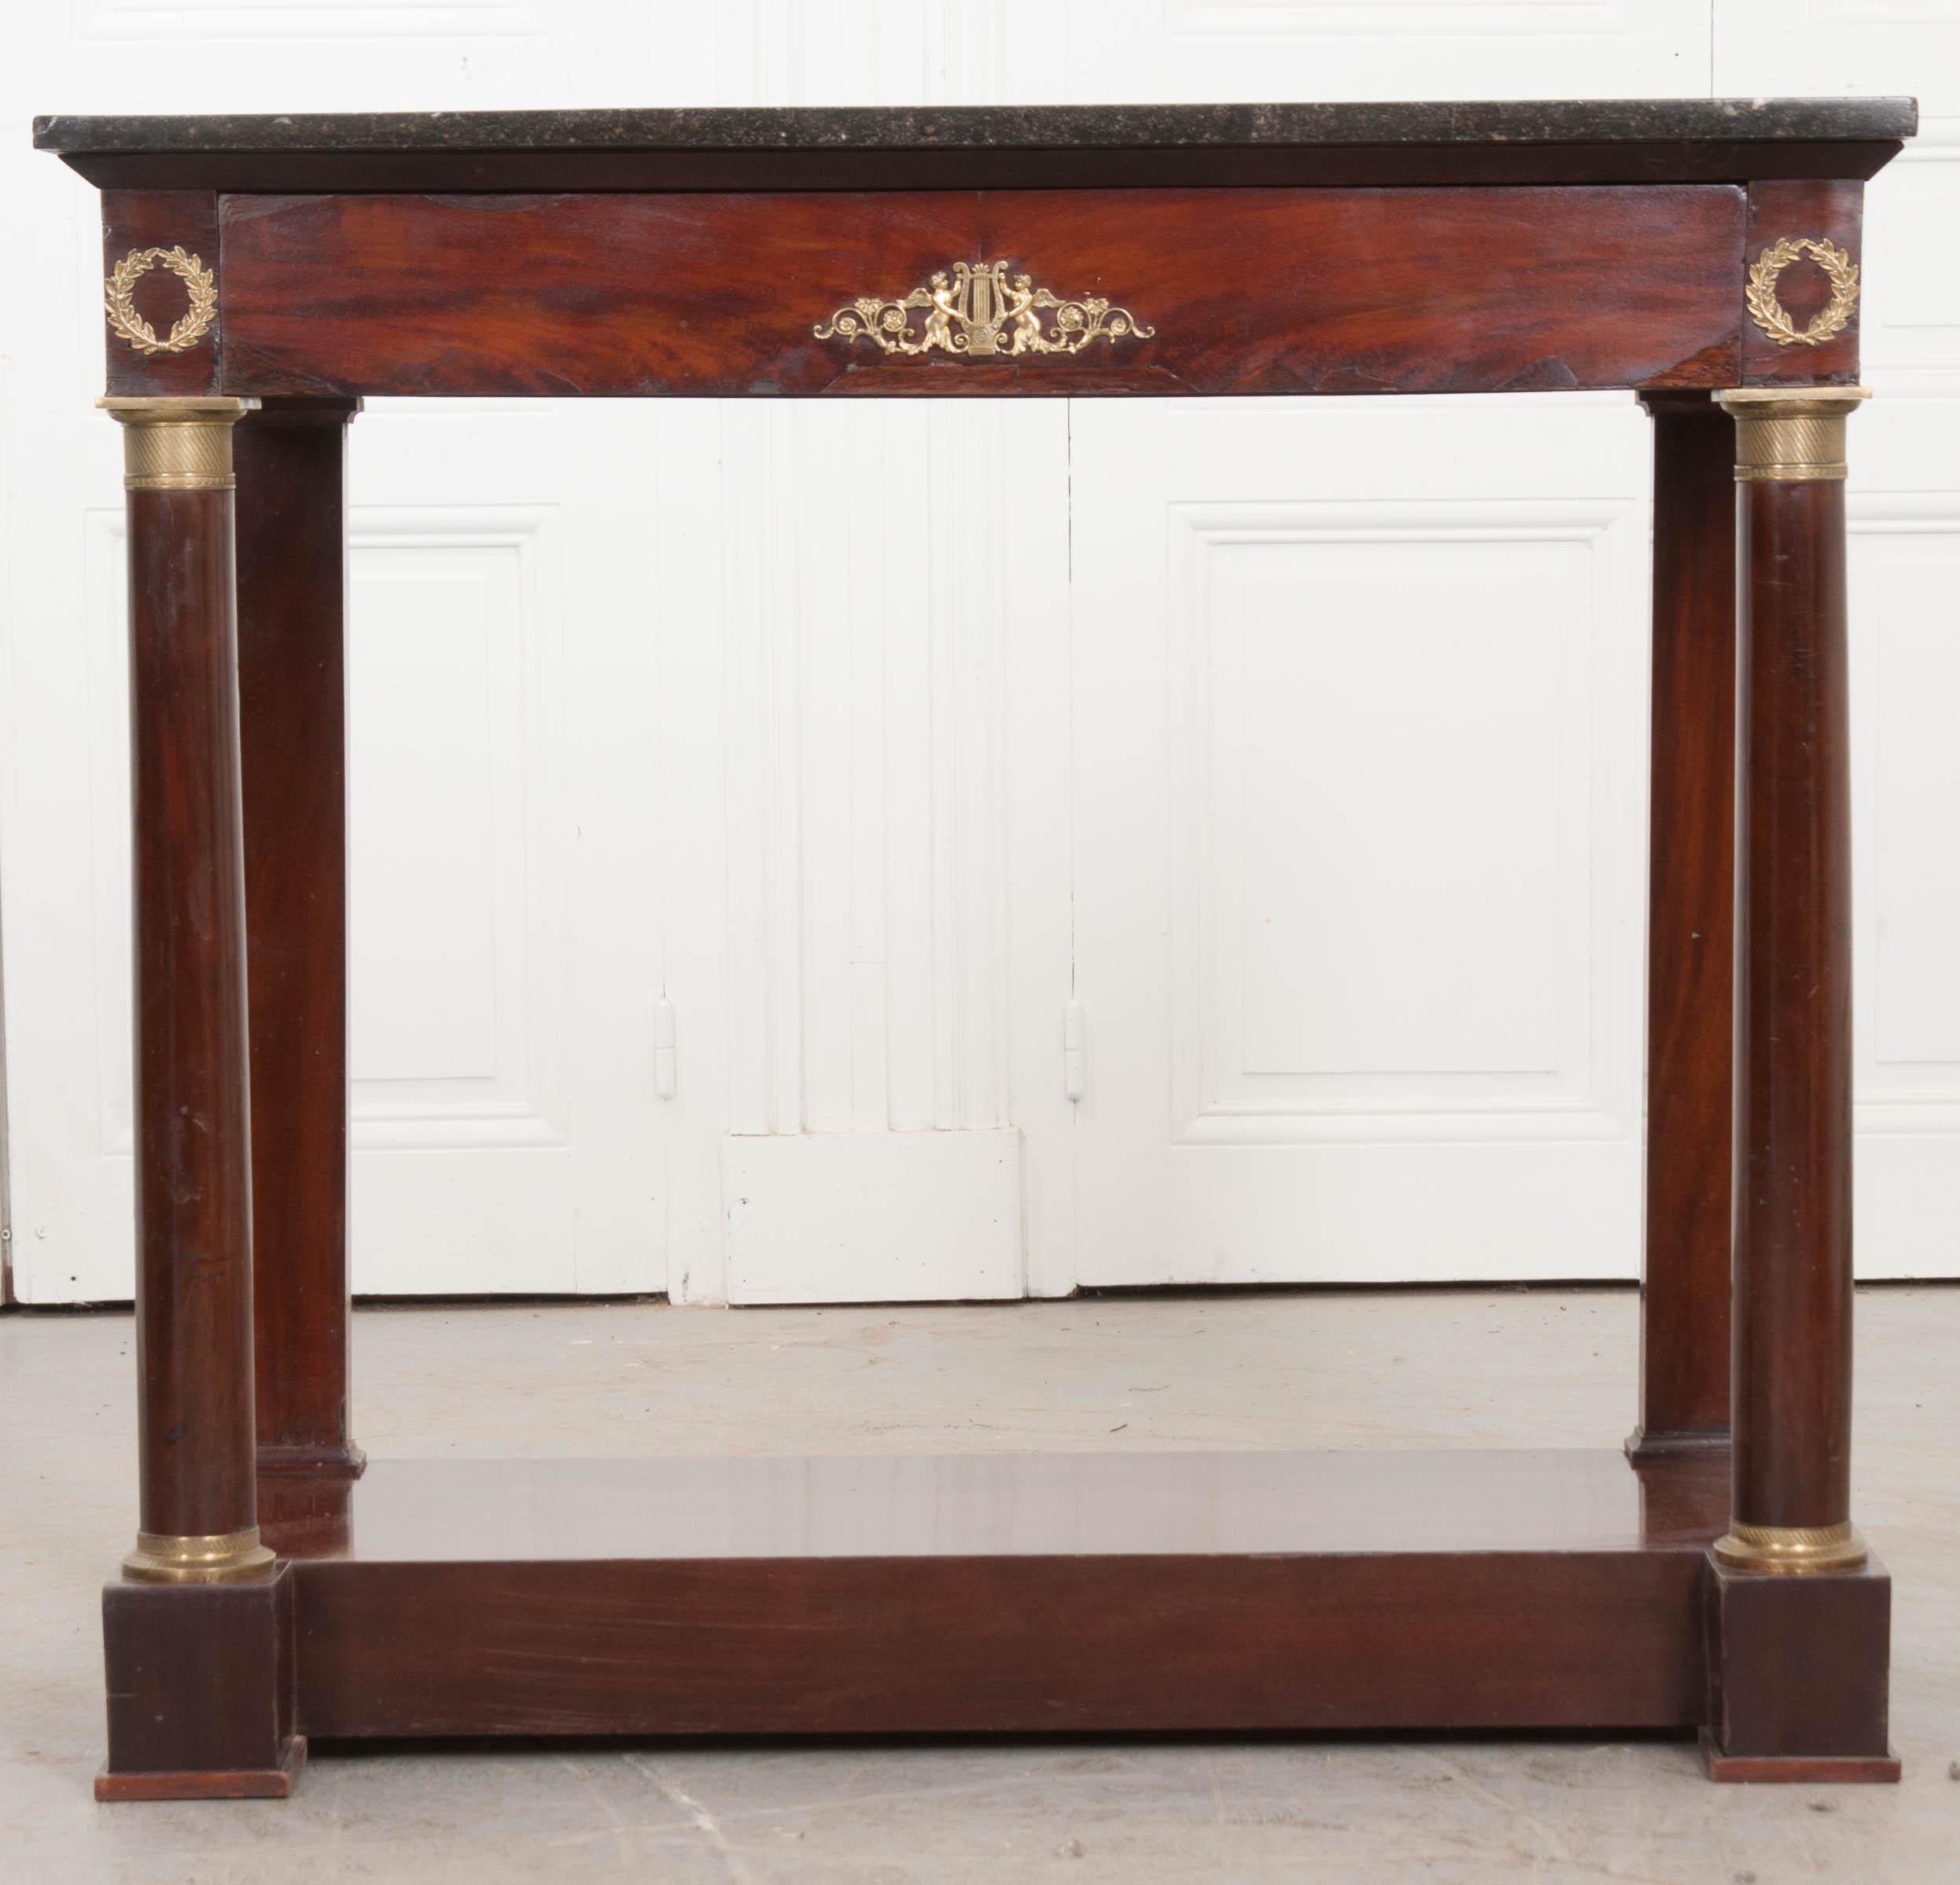 This elegant Empire-style mahogany console is from France, circa 1880, and features a charcoal-grey marble top with delicate white veining, over an apron with a central ormolu mount depicting a lyre flanked by a pair of cherubs, as well as “laurel